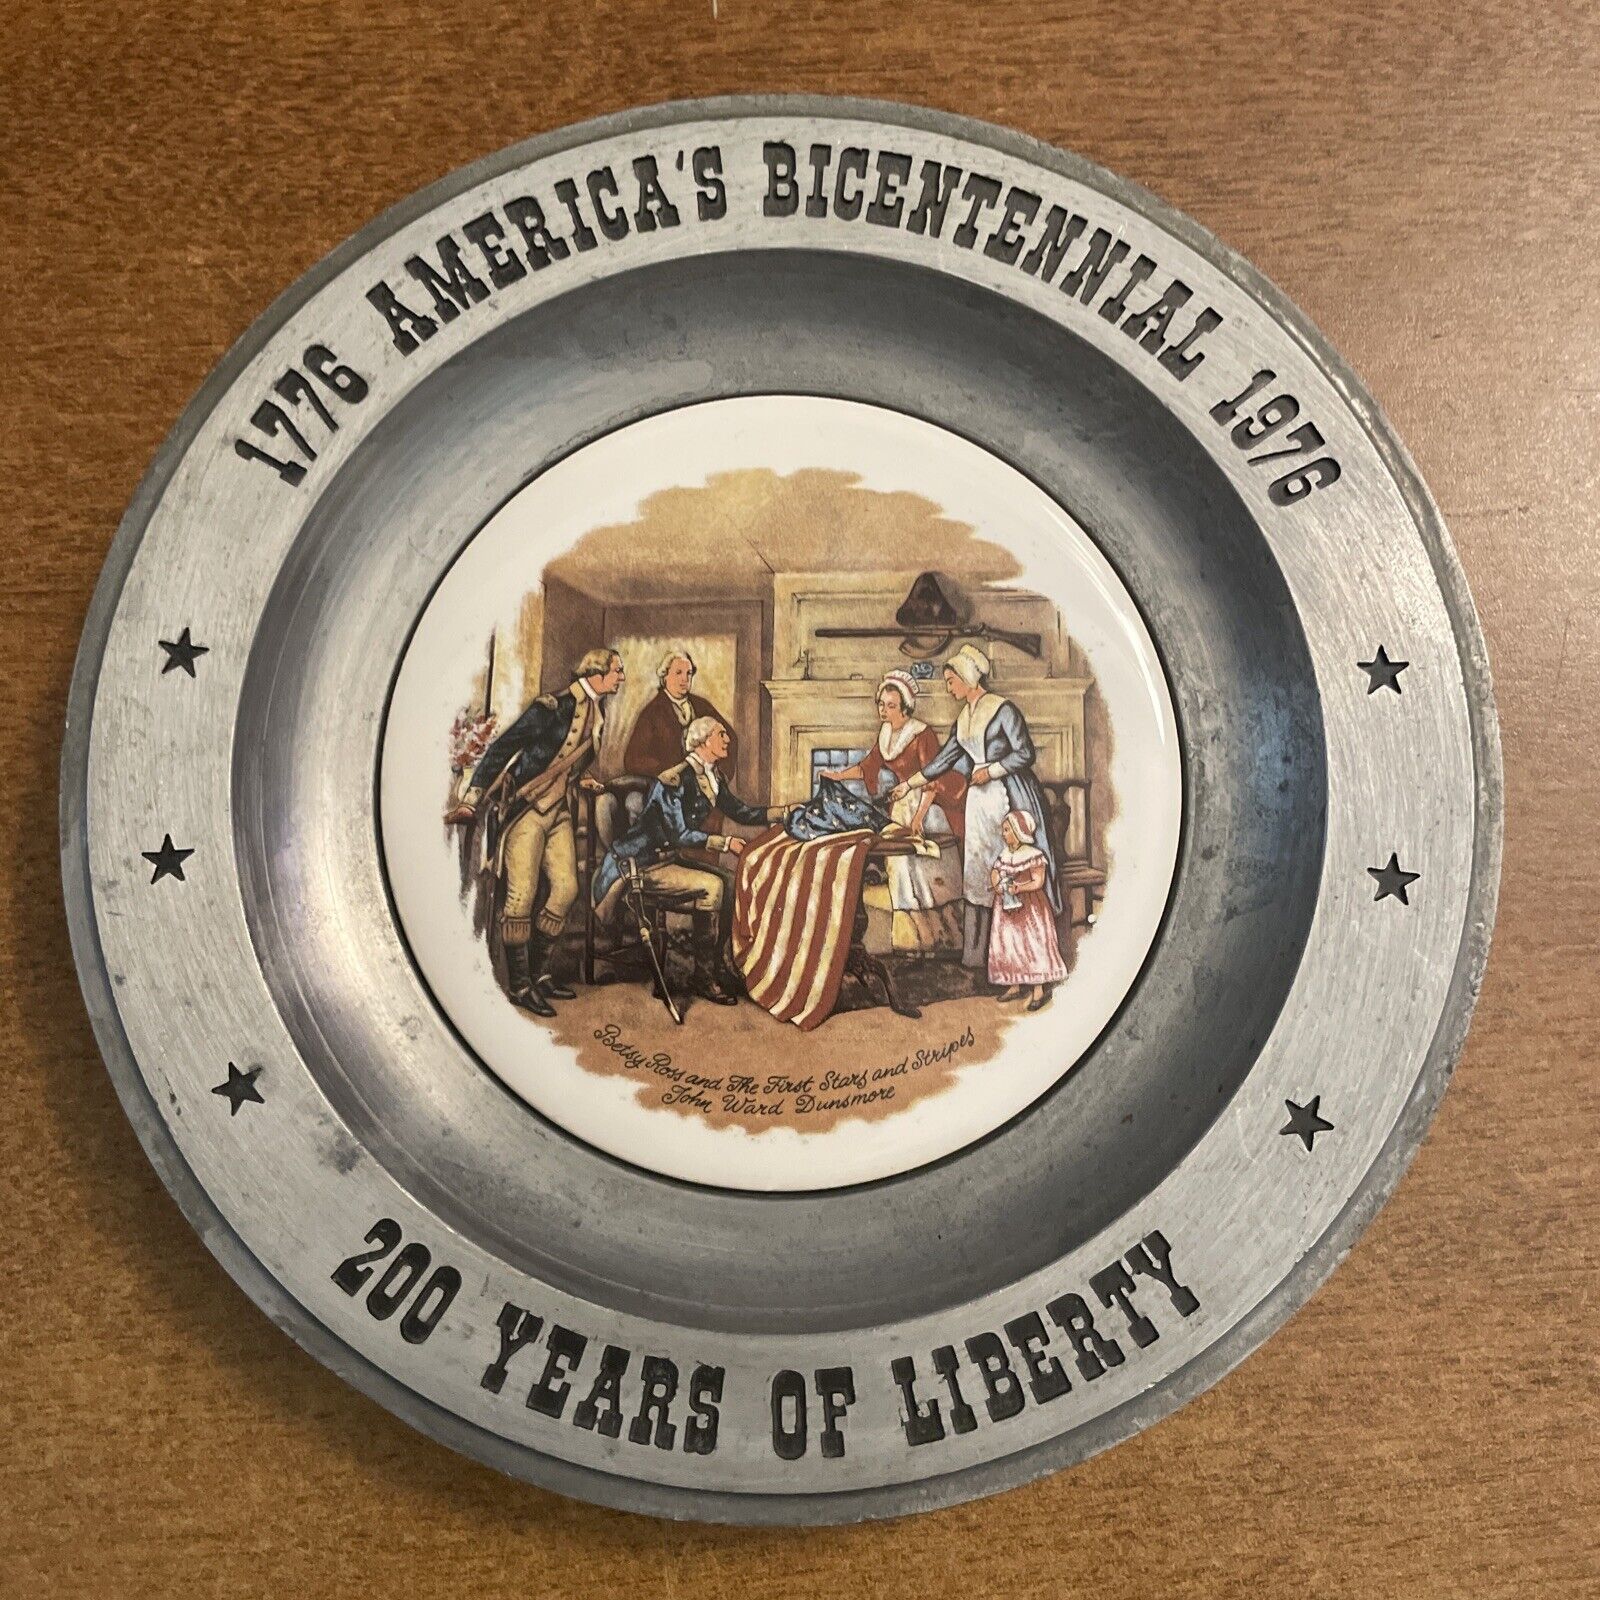 AMERICA’S BICENTENNIAL 1776-1976 PEWTER CERAMIC PLATE 200 YEARS OF LIBERTY 10.5”